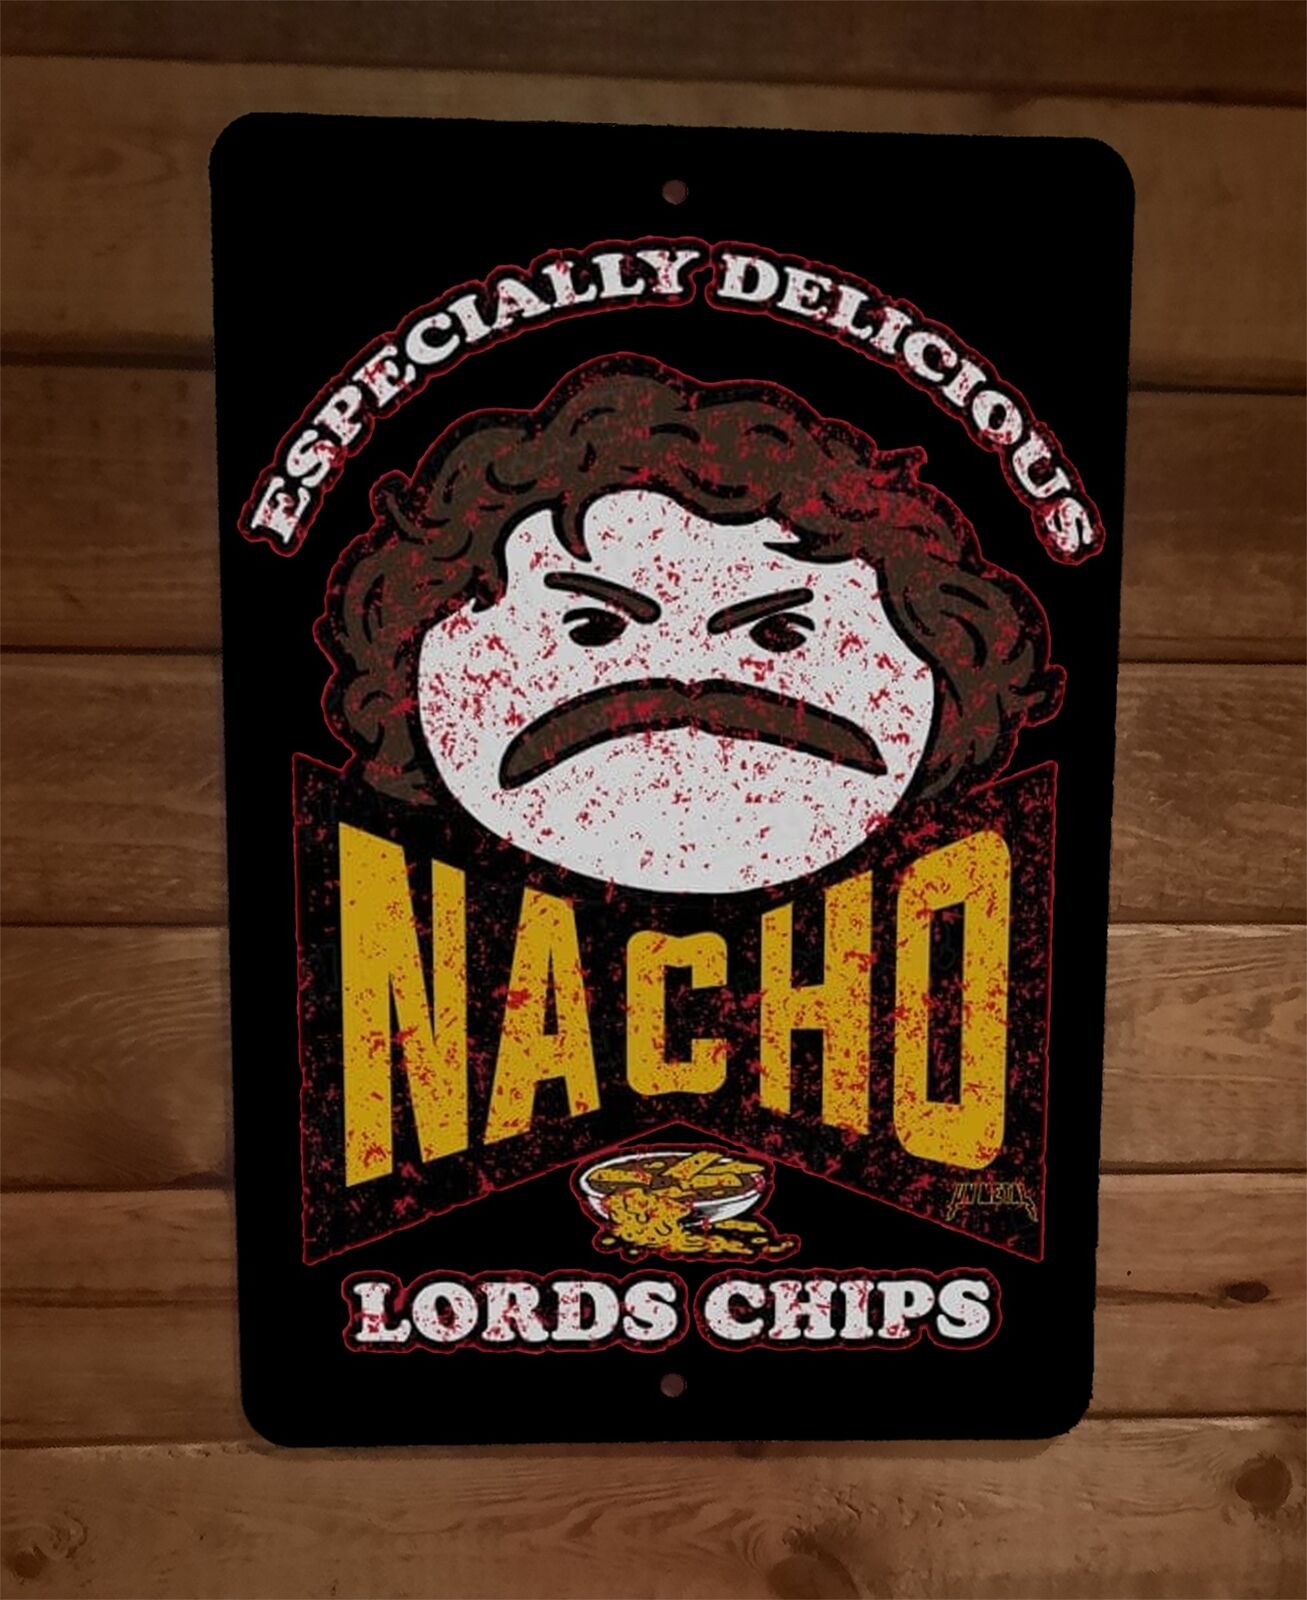 Especially Delicious Nacho Lord Chips 8x12 Metal Wall Sign